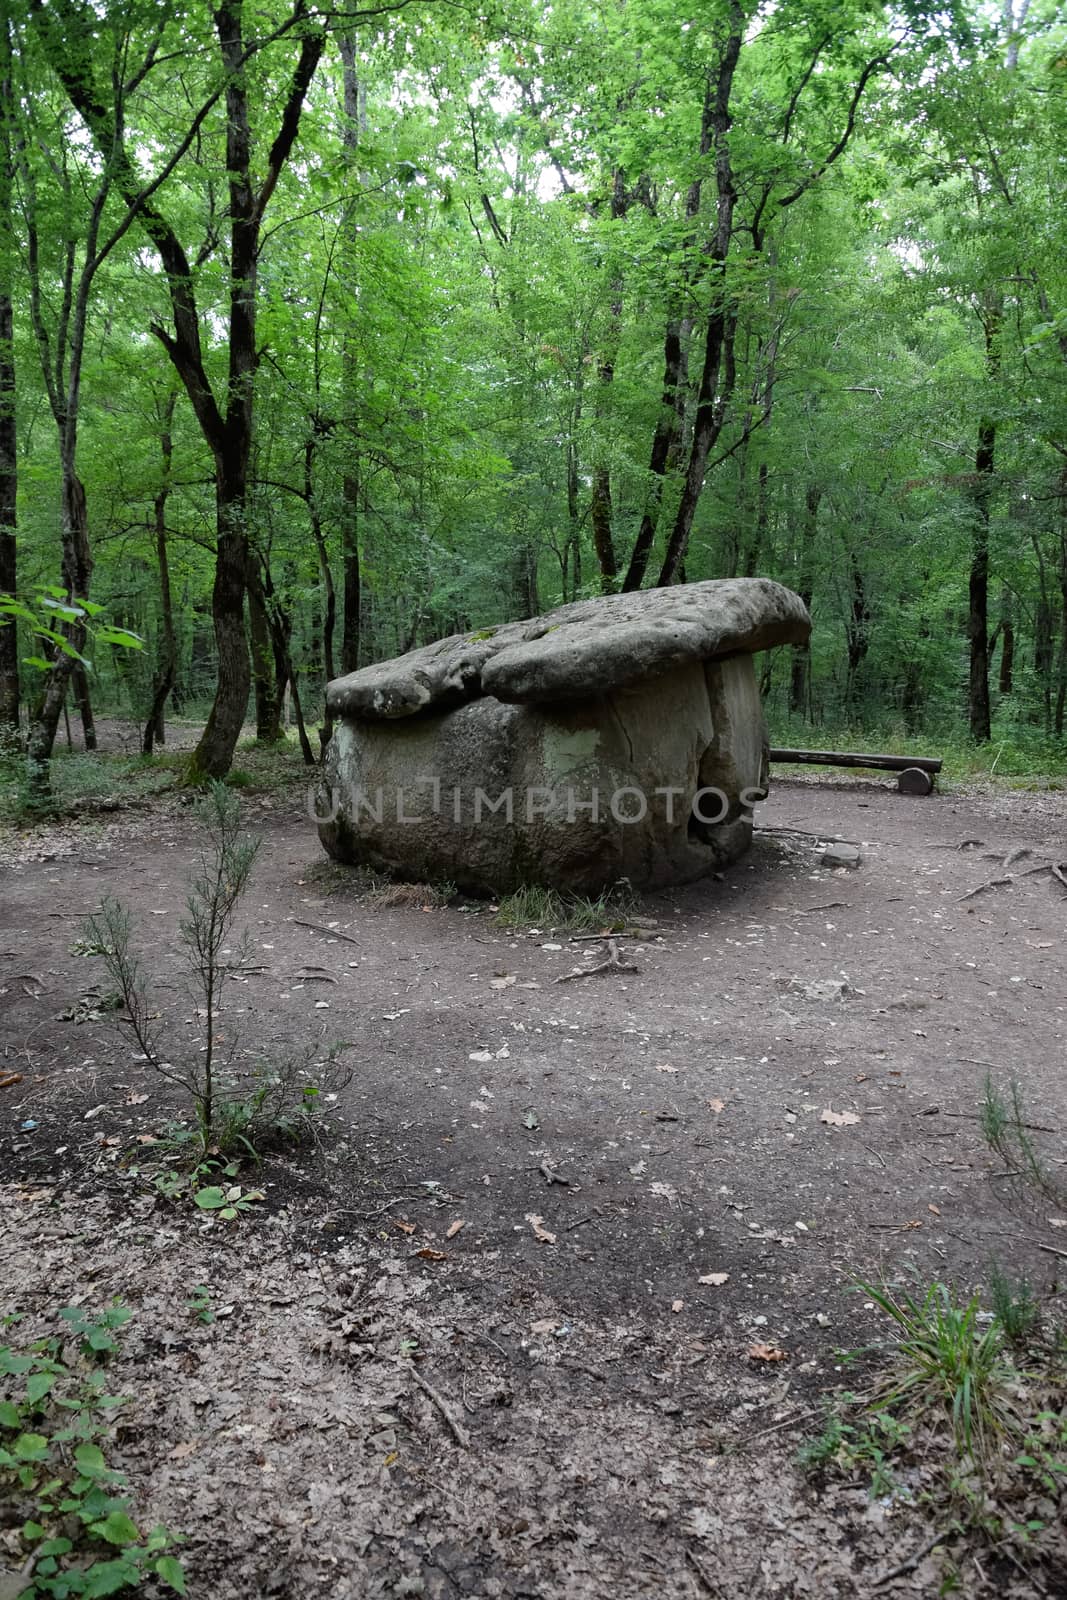 Dolmen in Shapsug. Forest in the city near the village of Shapsugskaya, the sights are dolmens and ruins of ancient civilization.